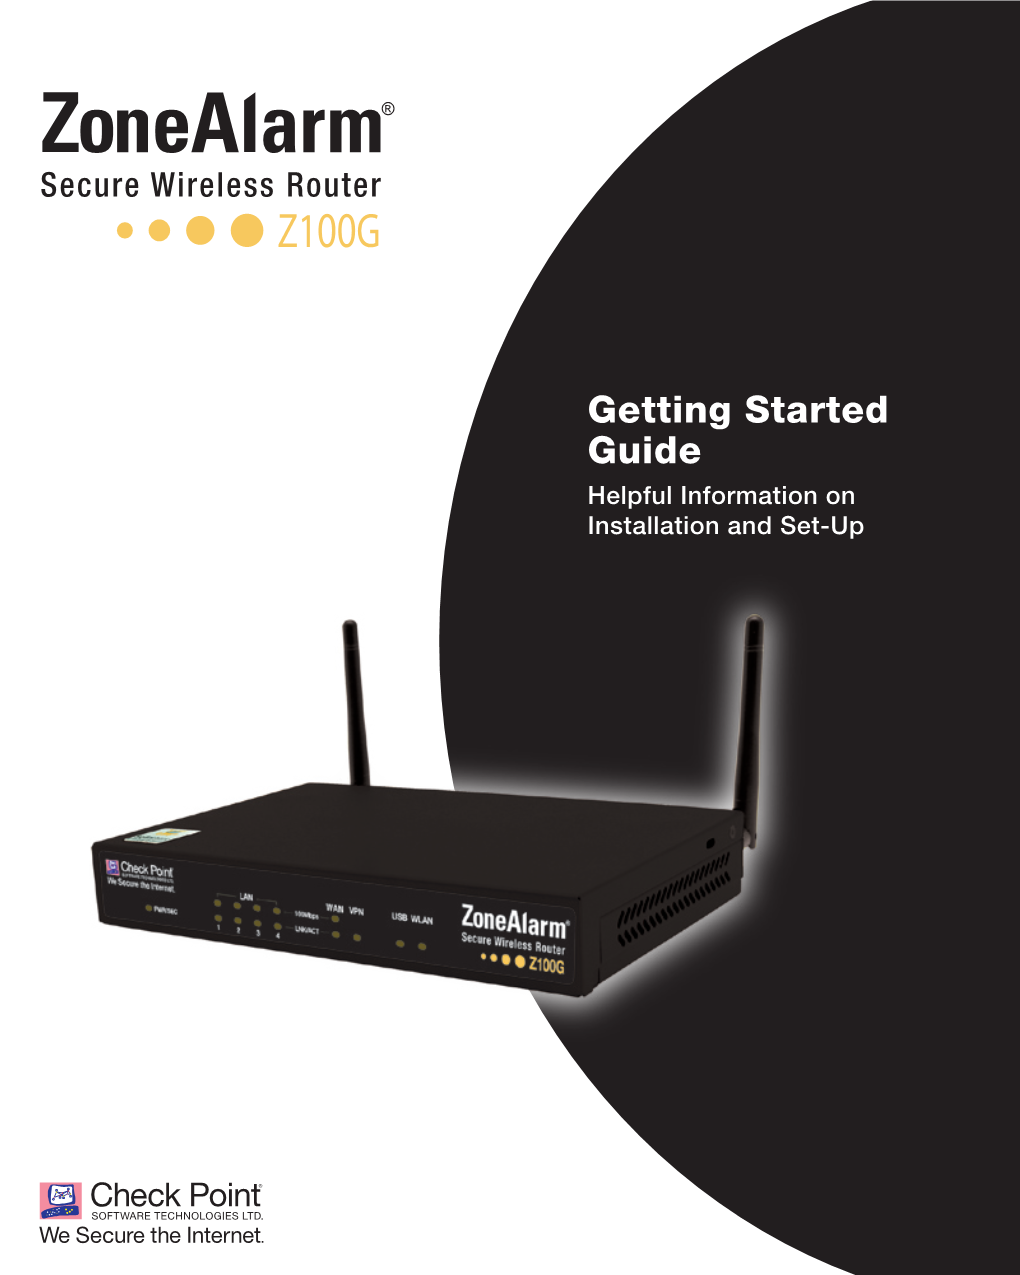 Secure Wireless Router Z100G